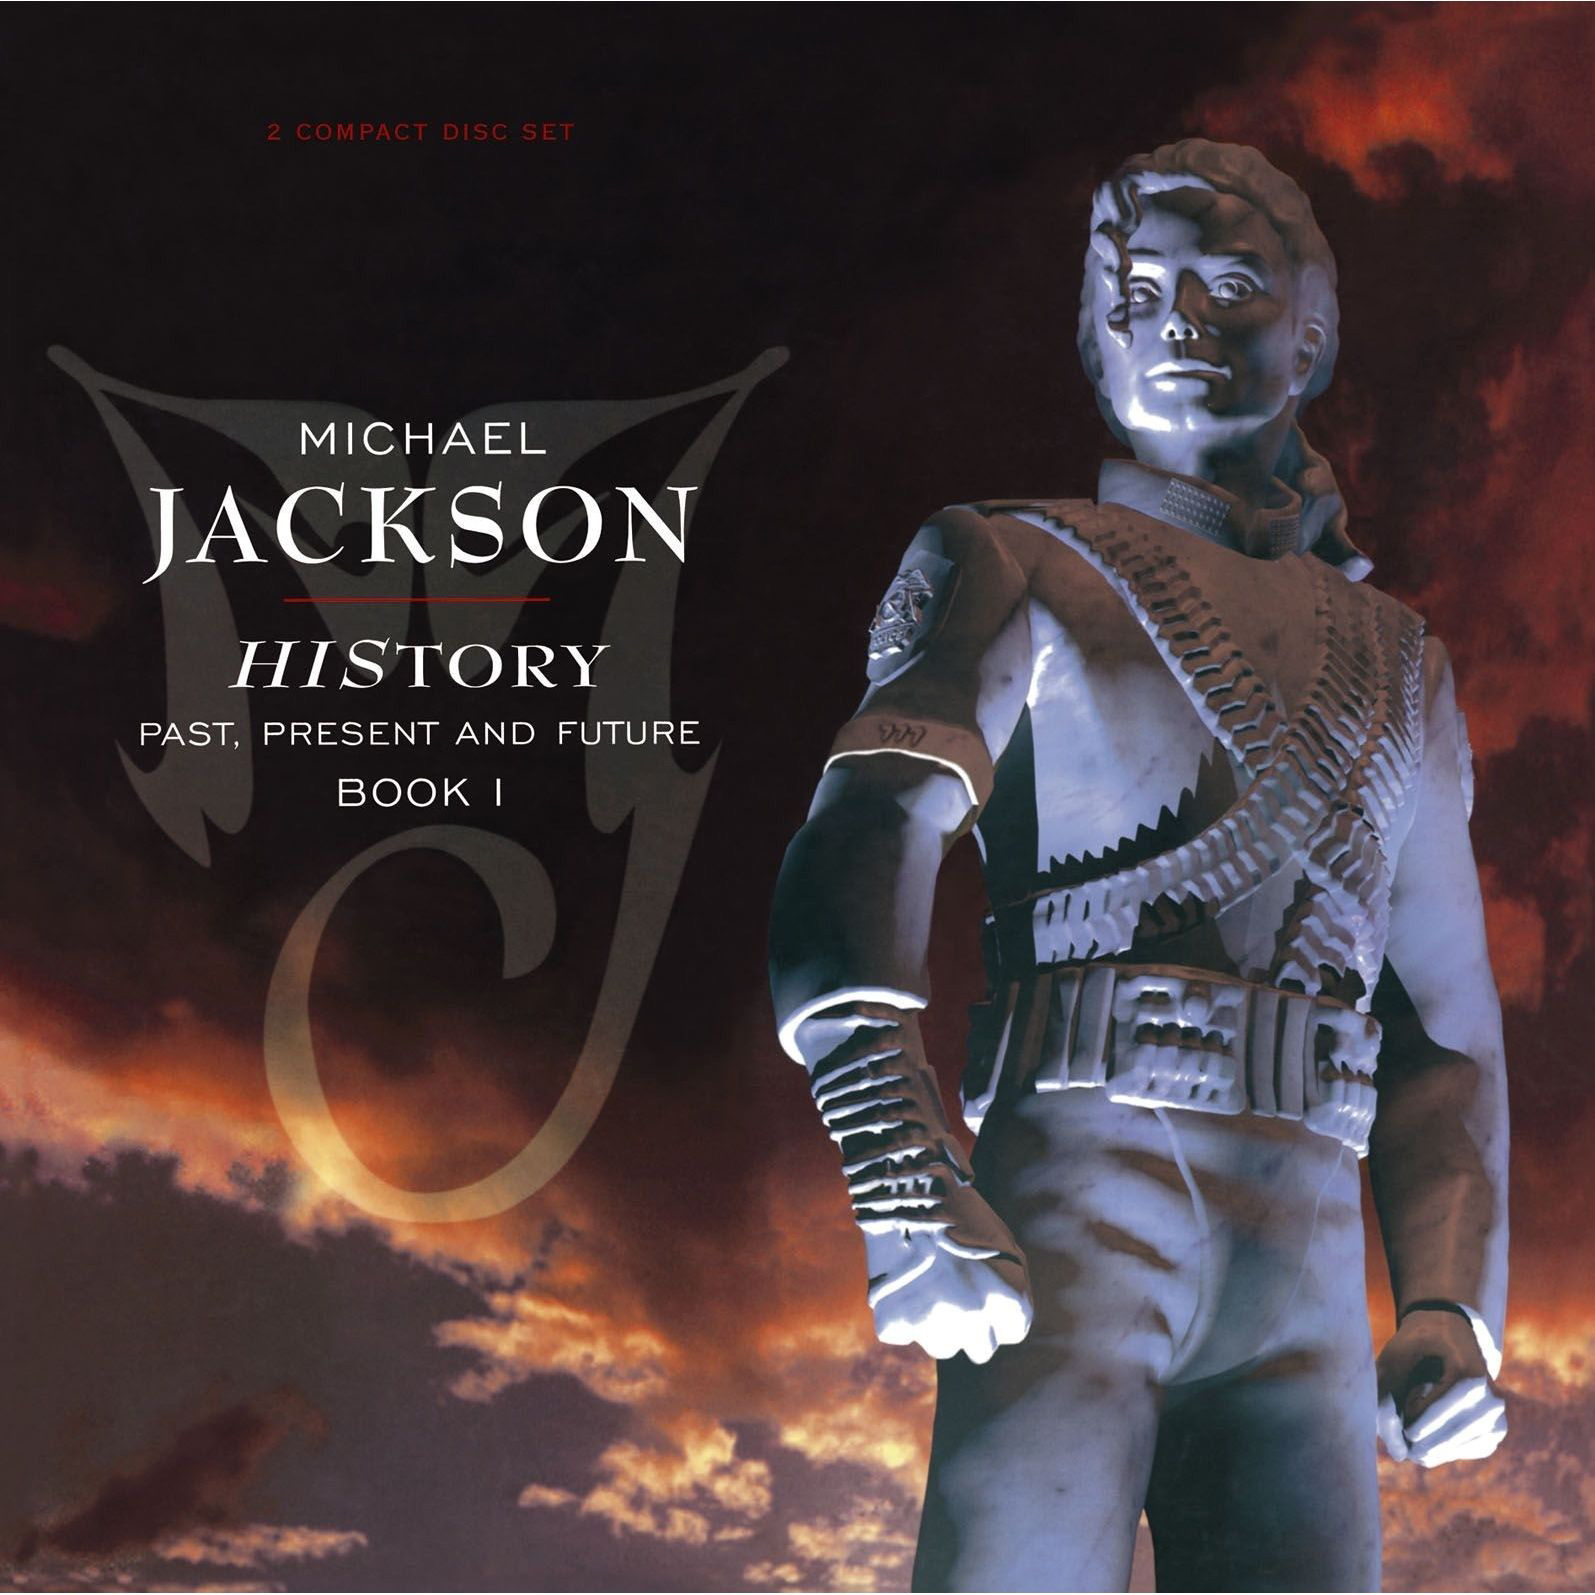 Image: The album cover of Michael Jackson's HIStory